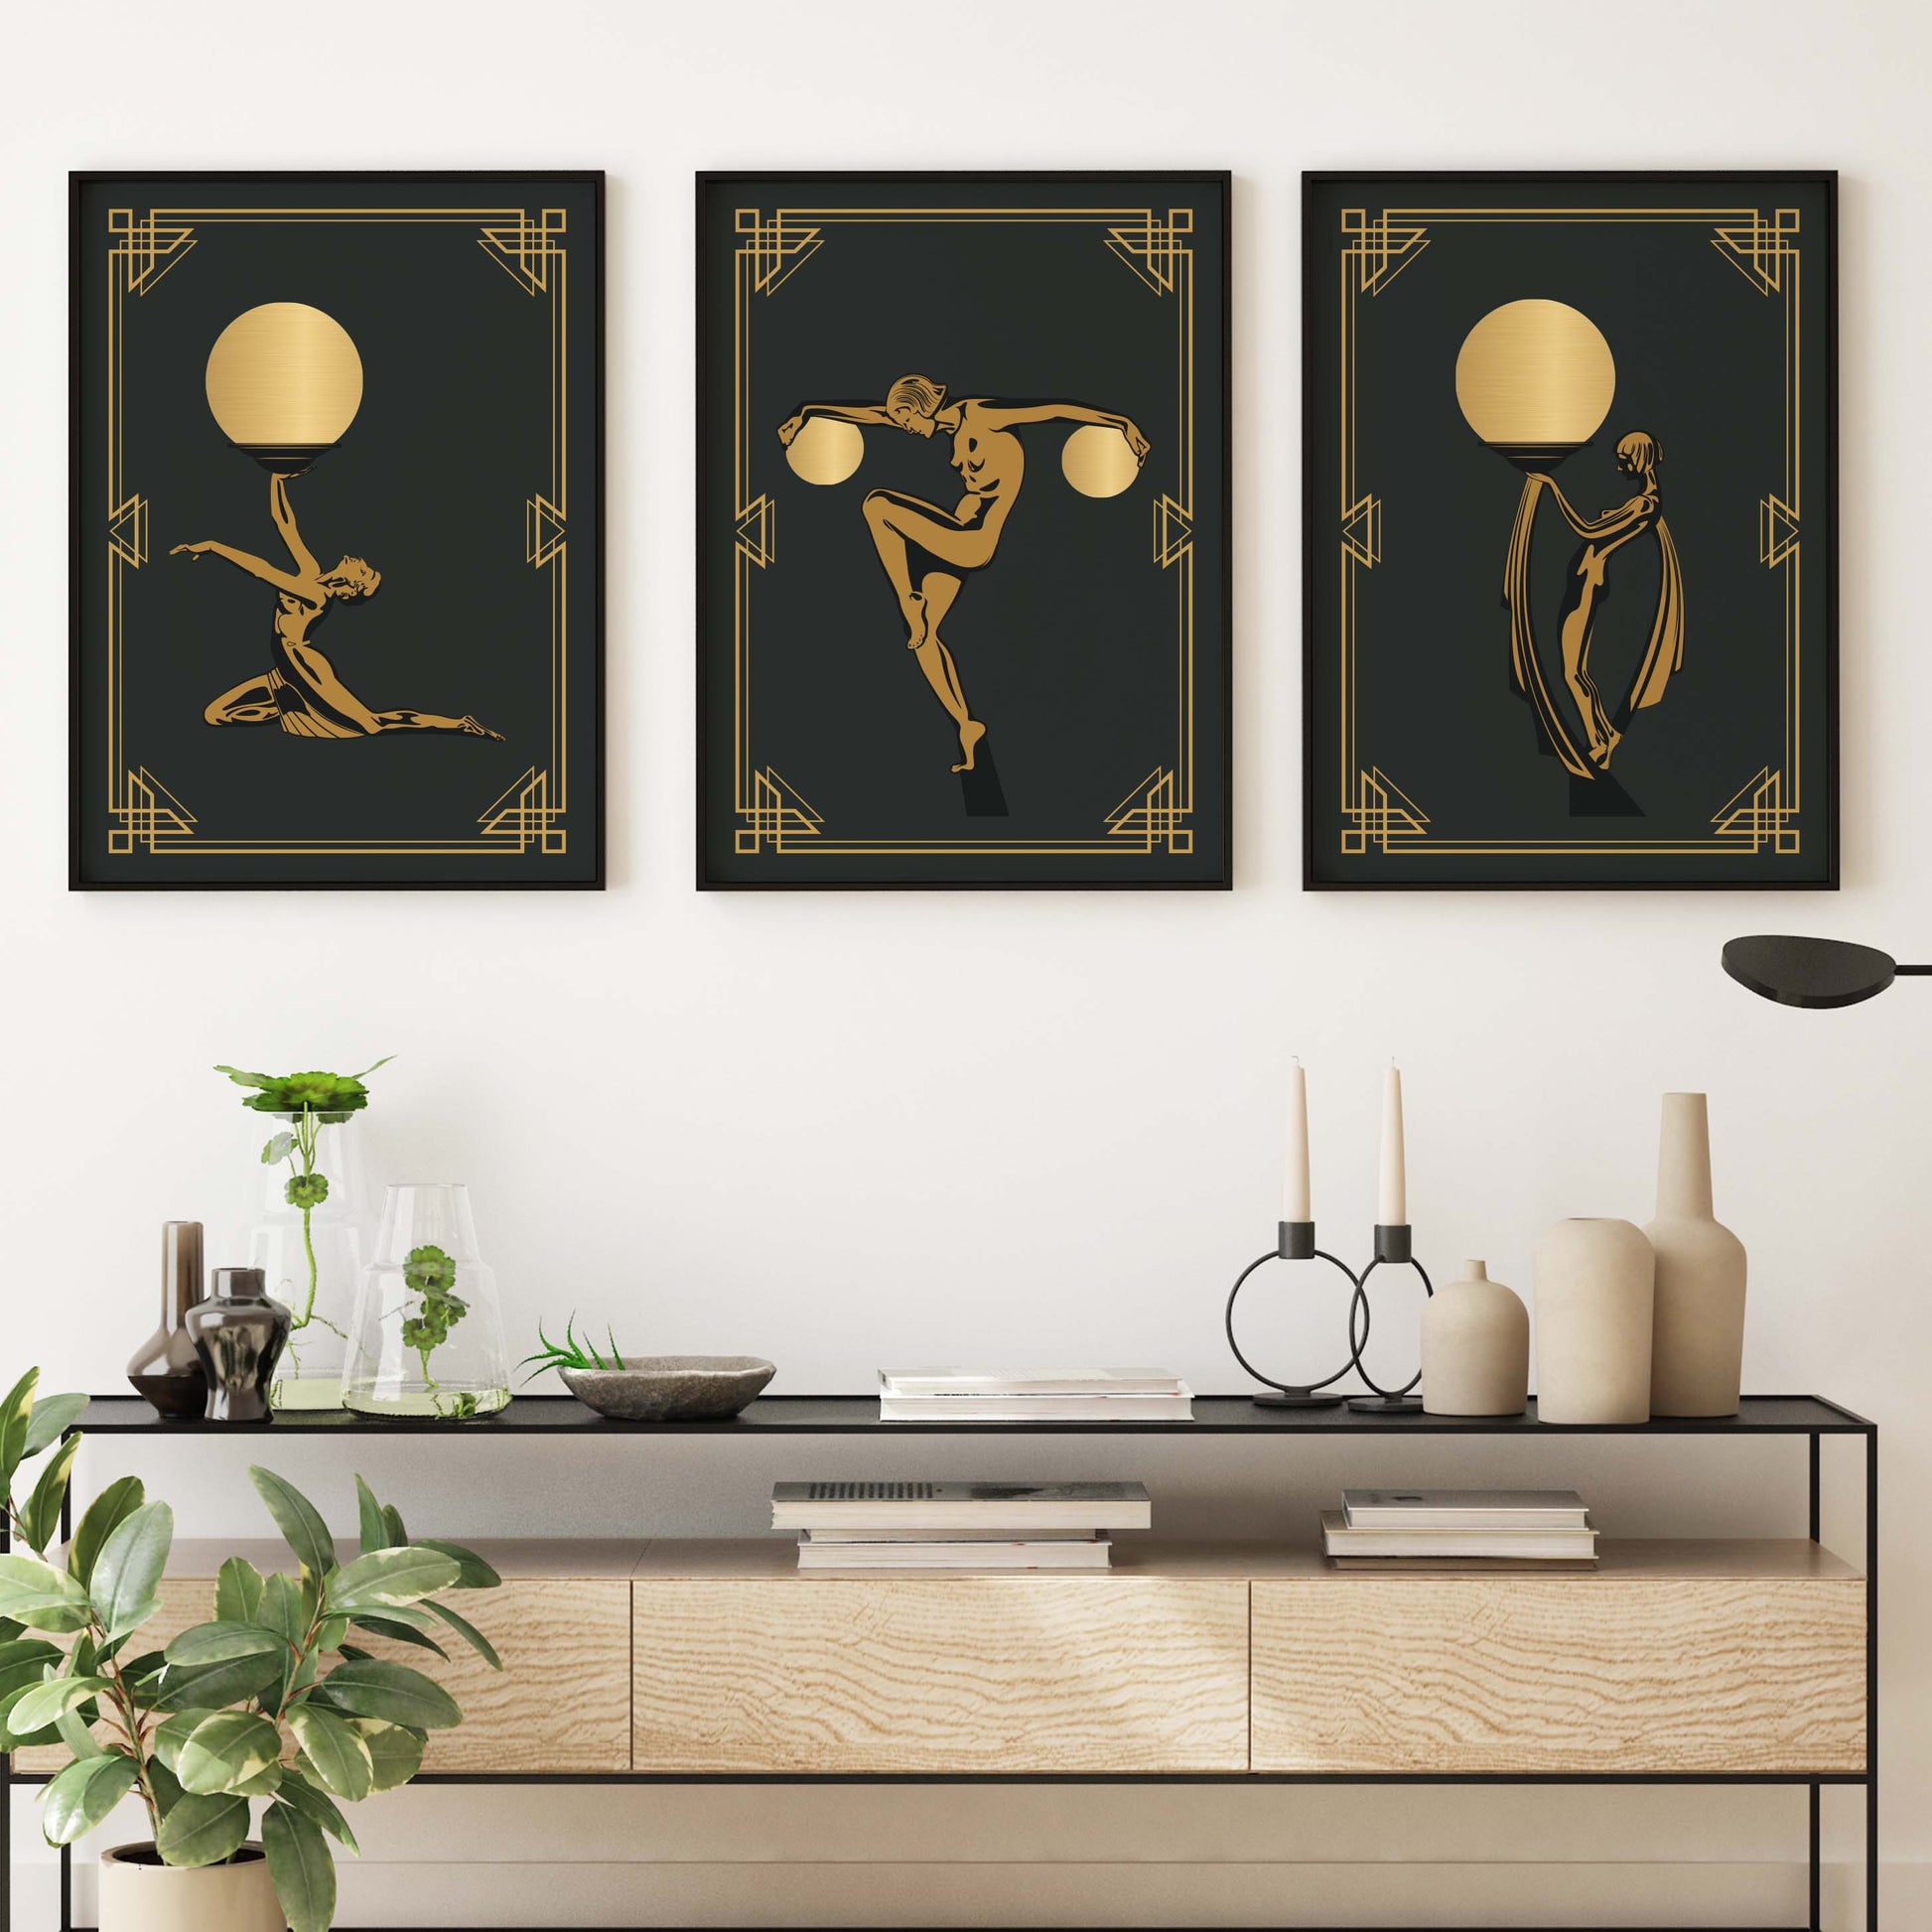 Art deco woman prints in black and gold, set of 3 wall art prints